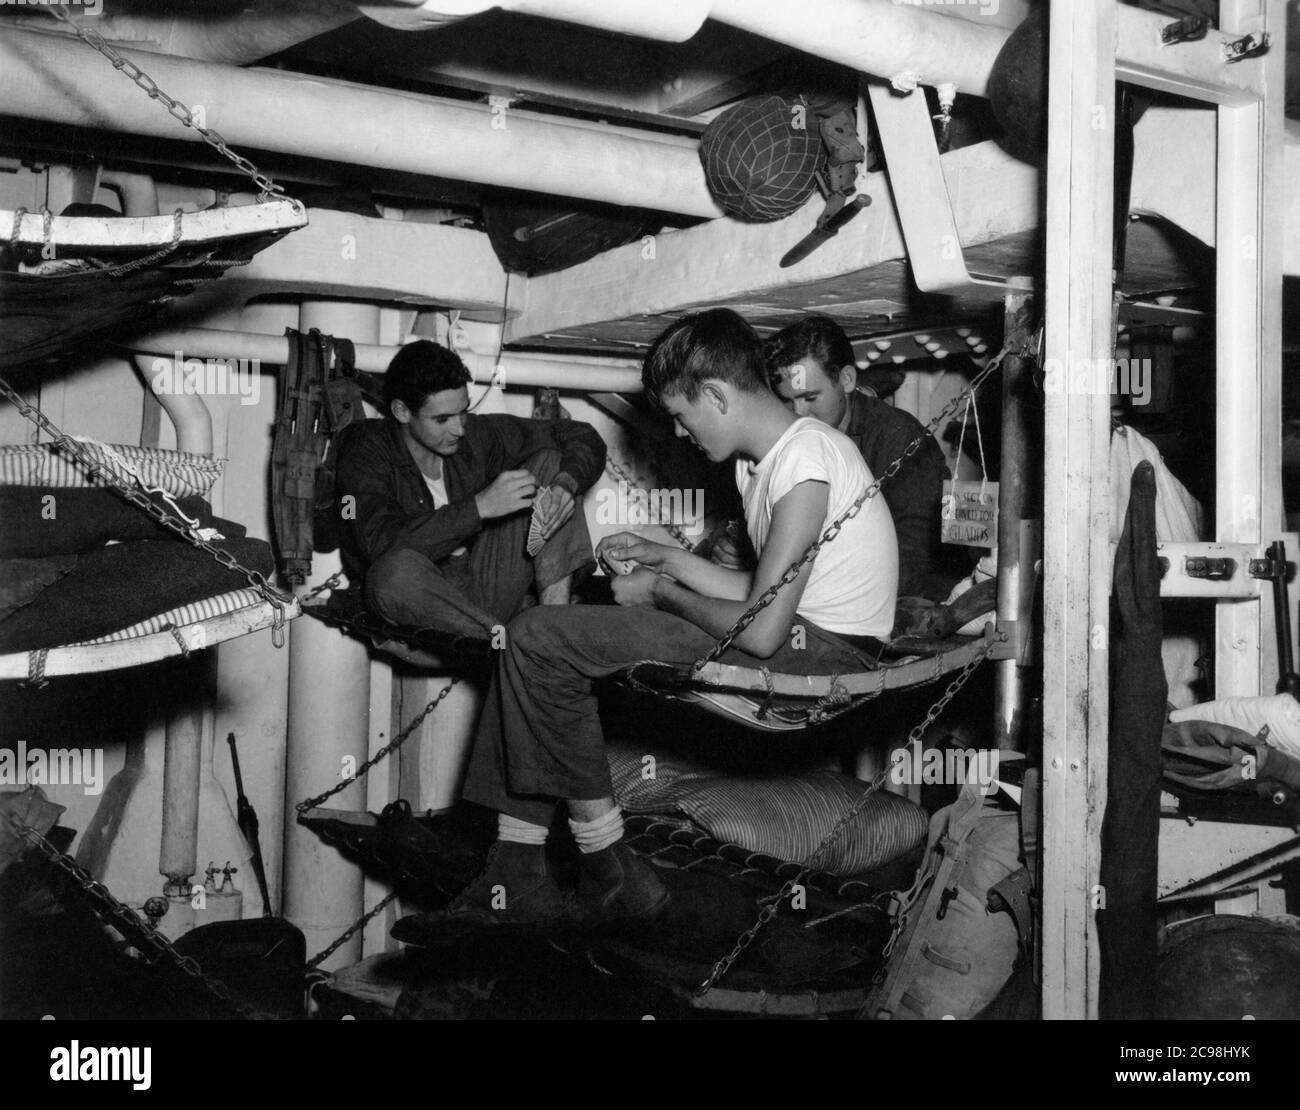 U.S. Navy enlisted men below decks on convoy OKS-14, July 1945. As the 75th anniversary of V-J Day approaches, The Consoli Collection has published four photo essays by U.S. Navy Lt. (j.g.) Joseph J. Consoli. The photos were taken between July and December 1945 in the Mariana Islands. They document U.S. Navy life before and after the Japanese surrender. Stock Photo